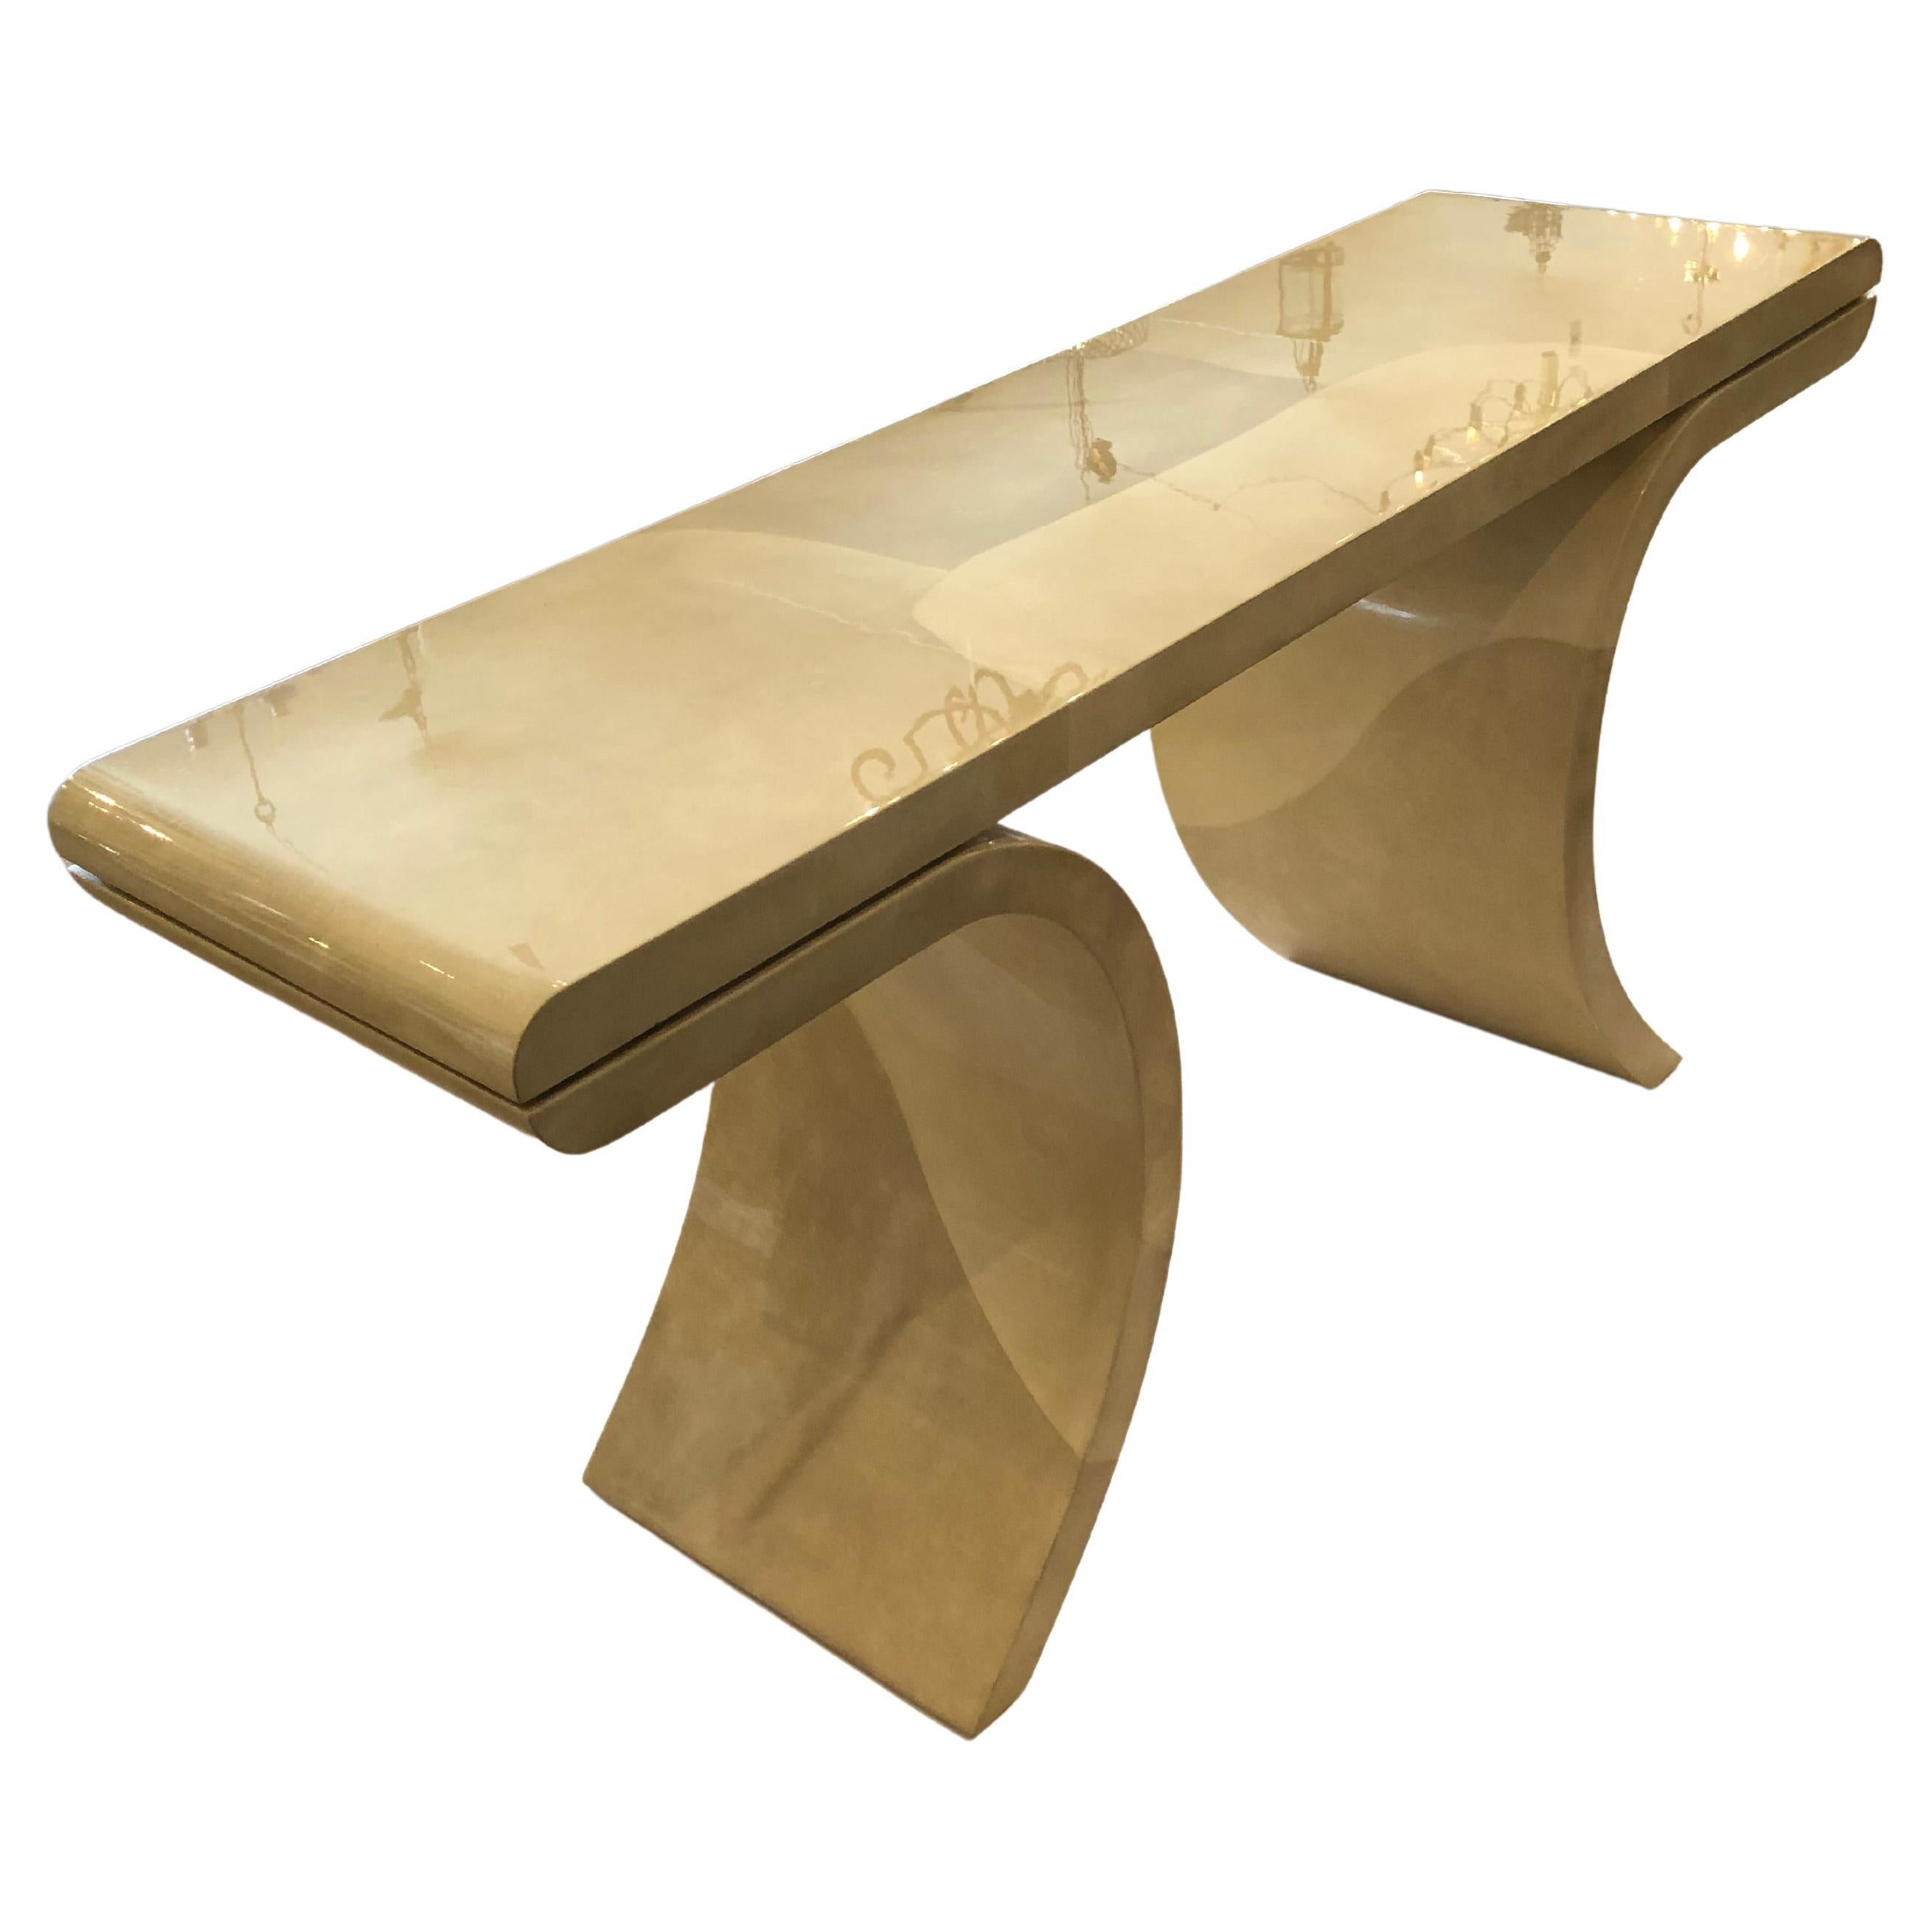 Super chic glossy laquered faux goatskin console table in the manner of Karl Springer having shades of beige and fabulous sleek silhouette.  Heavy and well constructed.